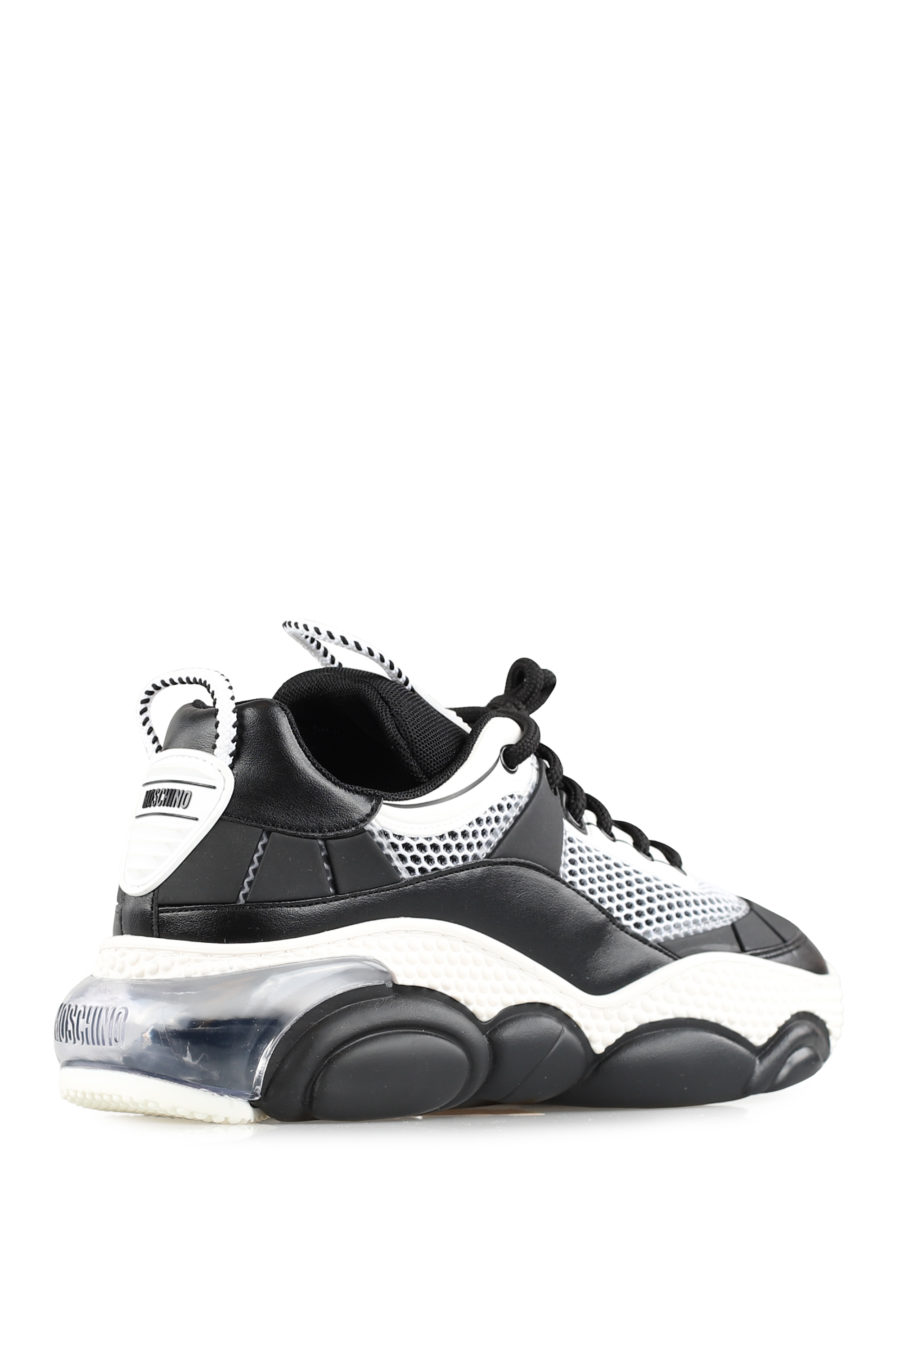 Trainers "Bubble Teddy" in black and white - ae702c6759dad5a65d9fbad9030b2a74bb92ba29